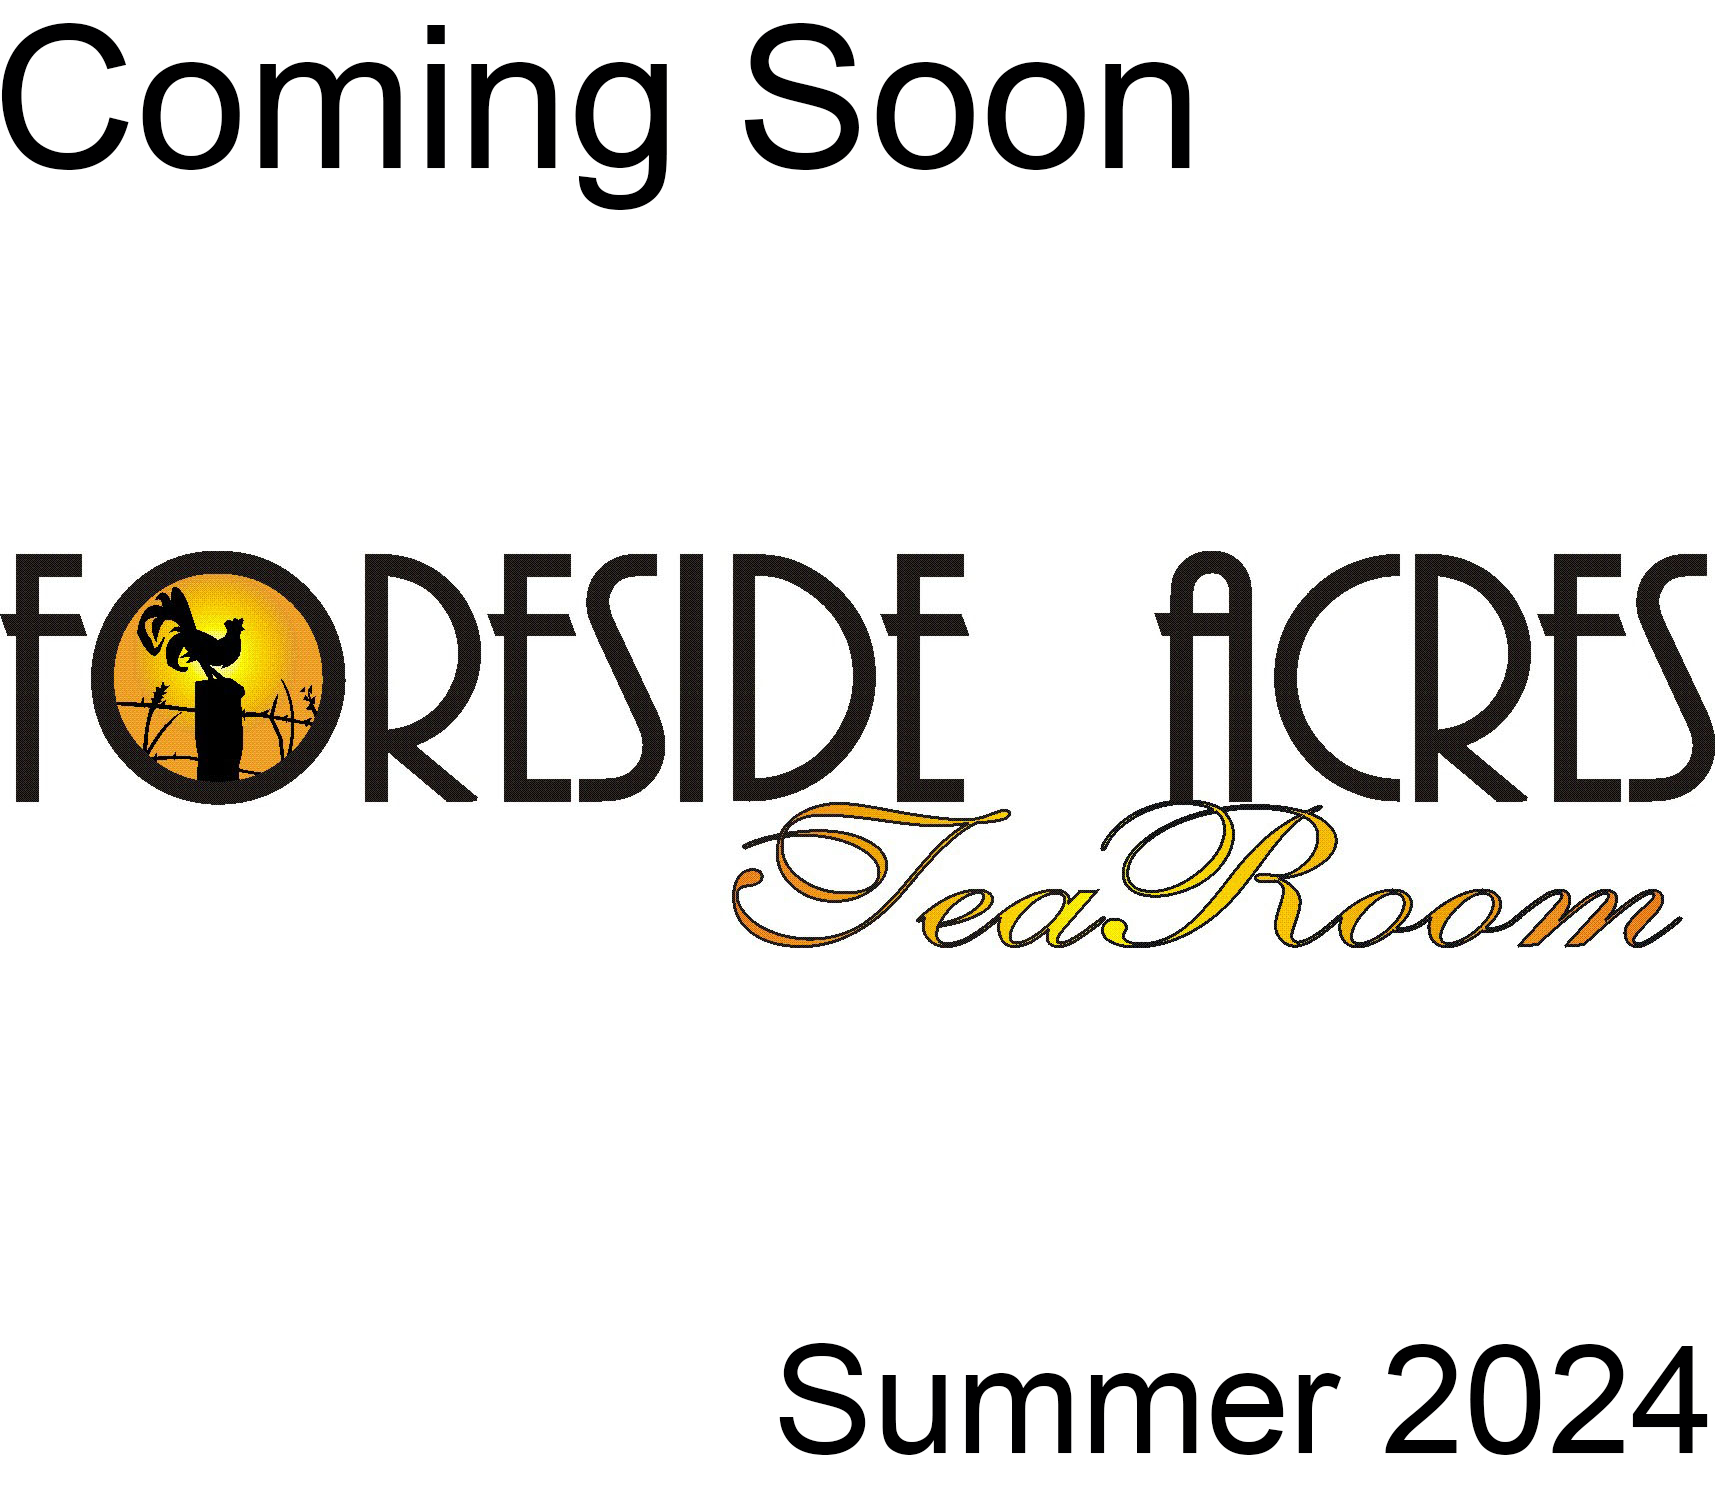 Foreside Acres Tea Room Coming Soon in Summer 2024